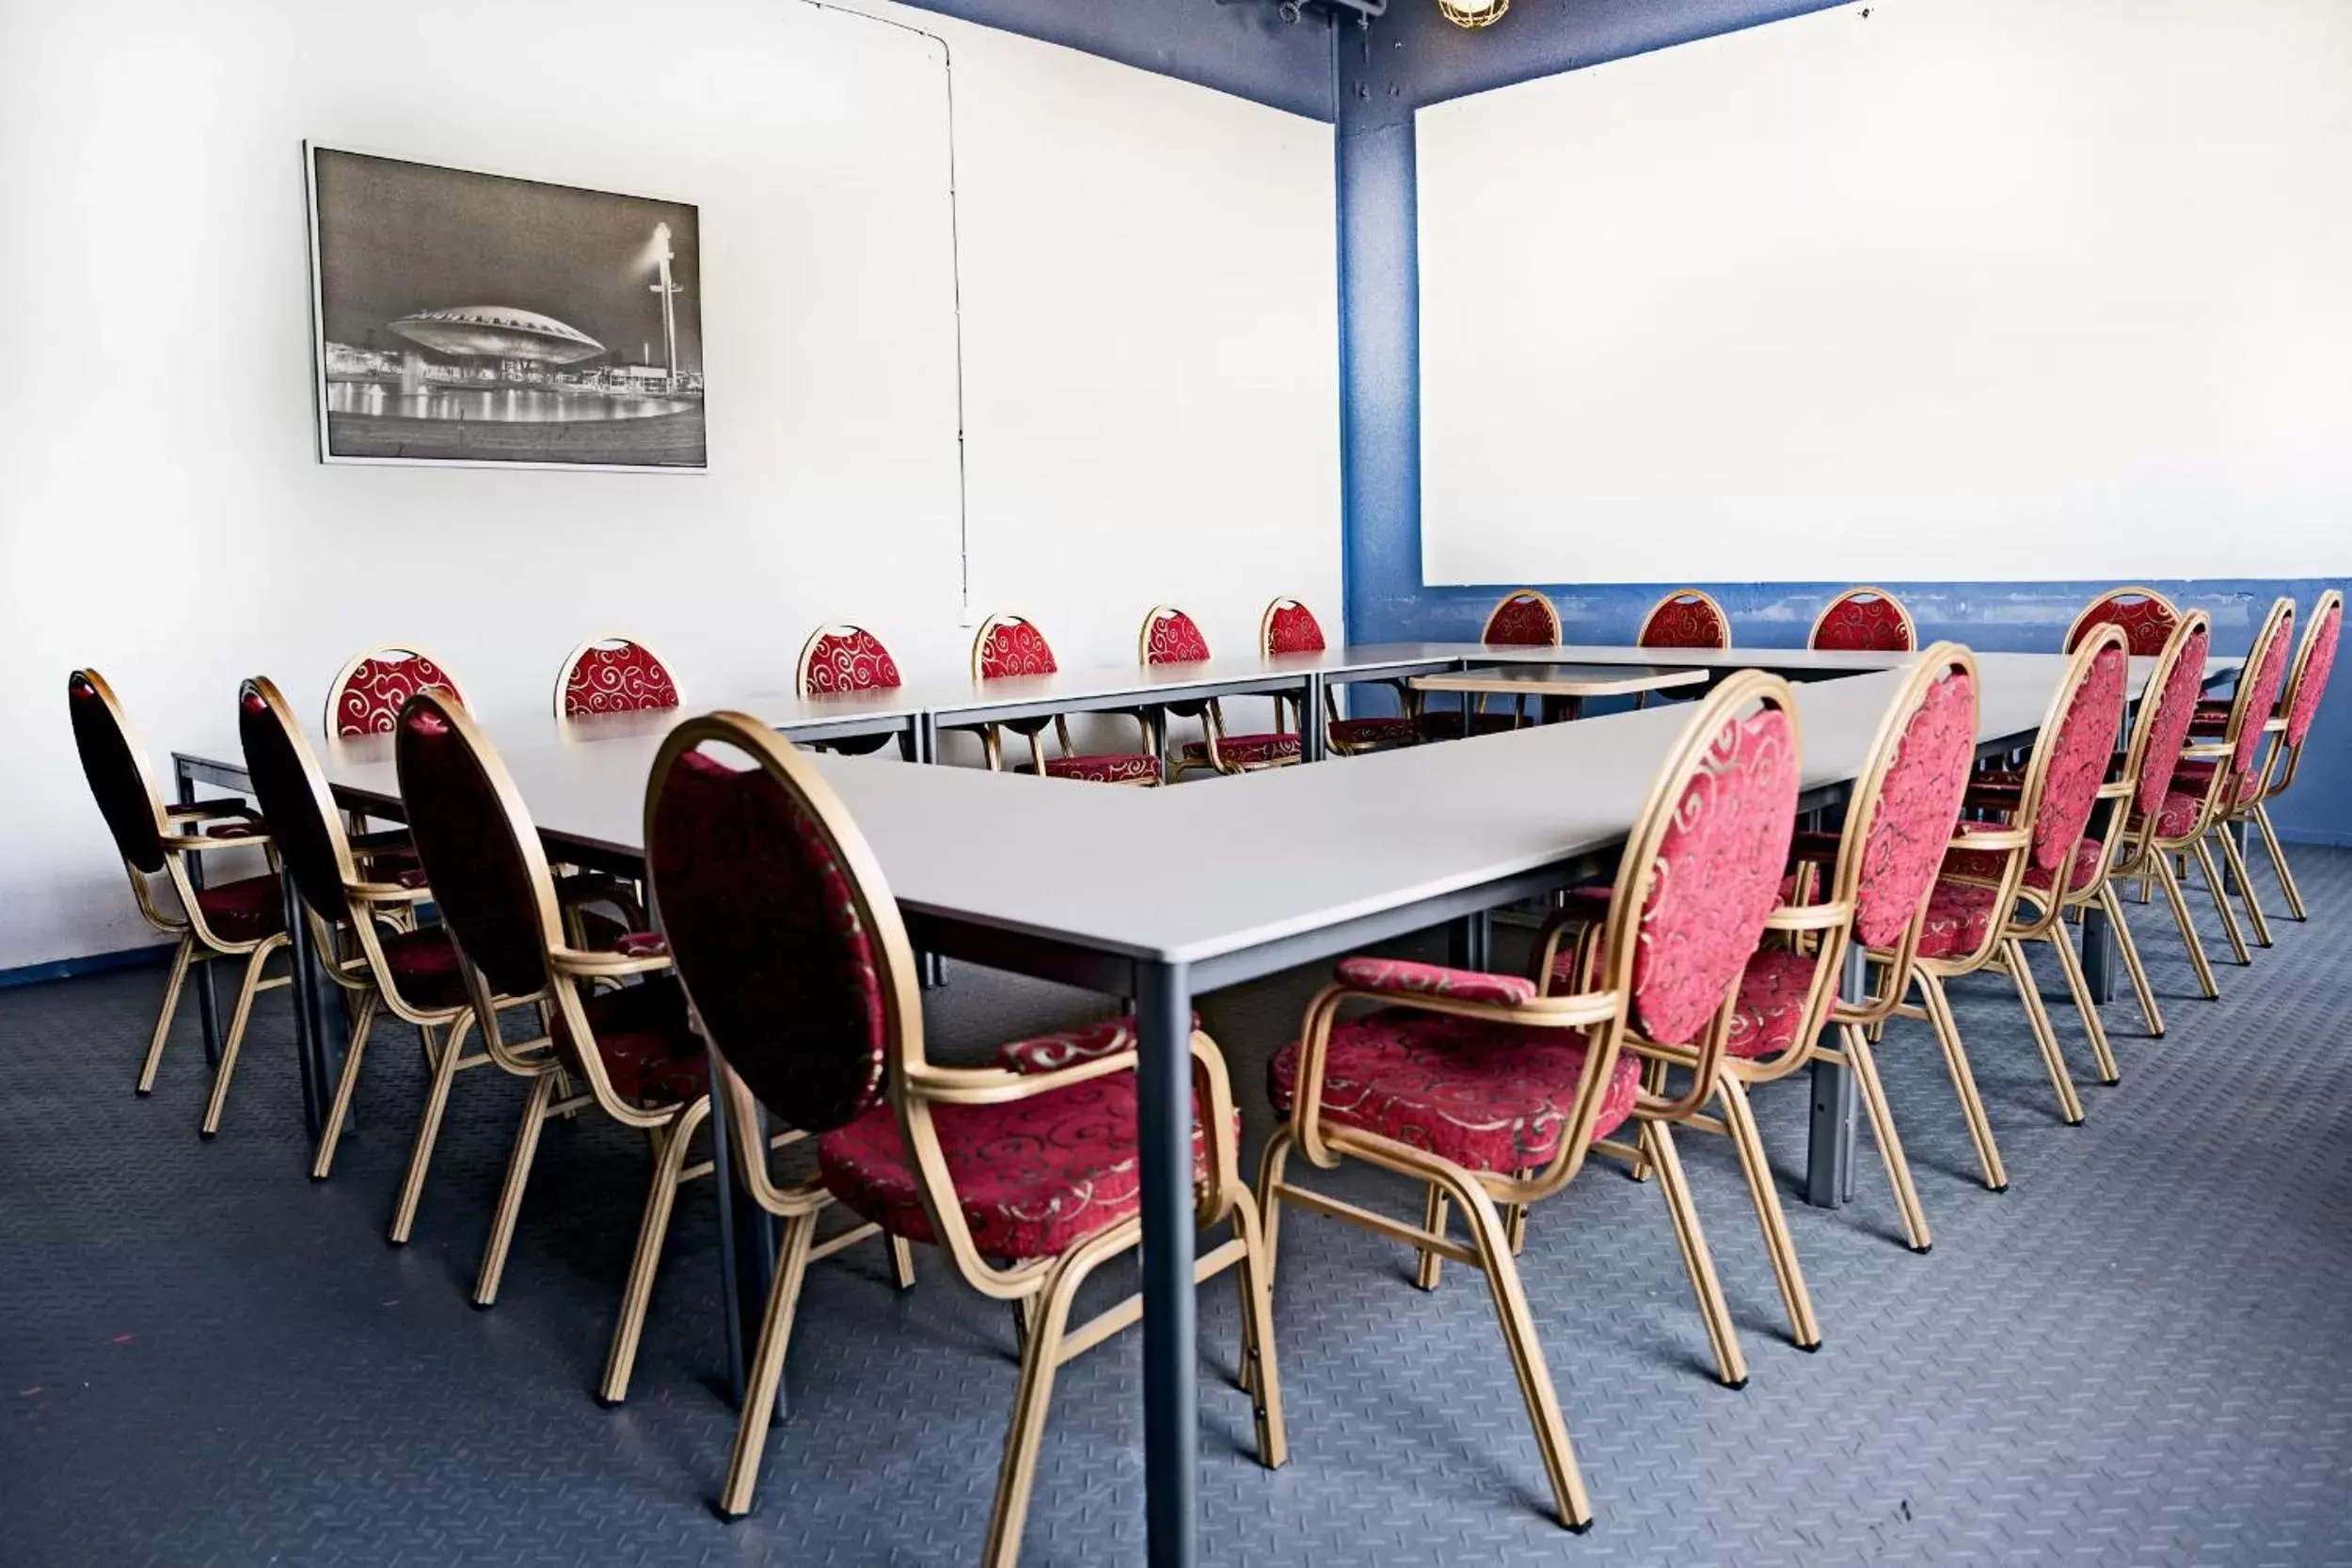 Meeting/conference room in Blue Collar Hotel